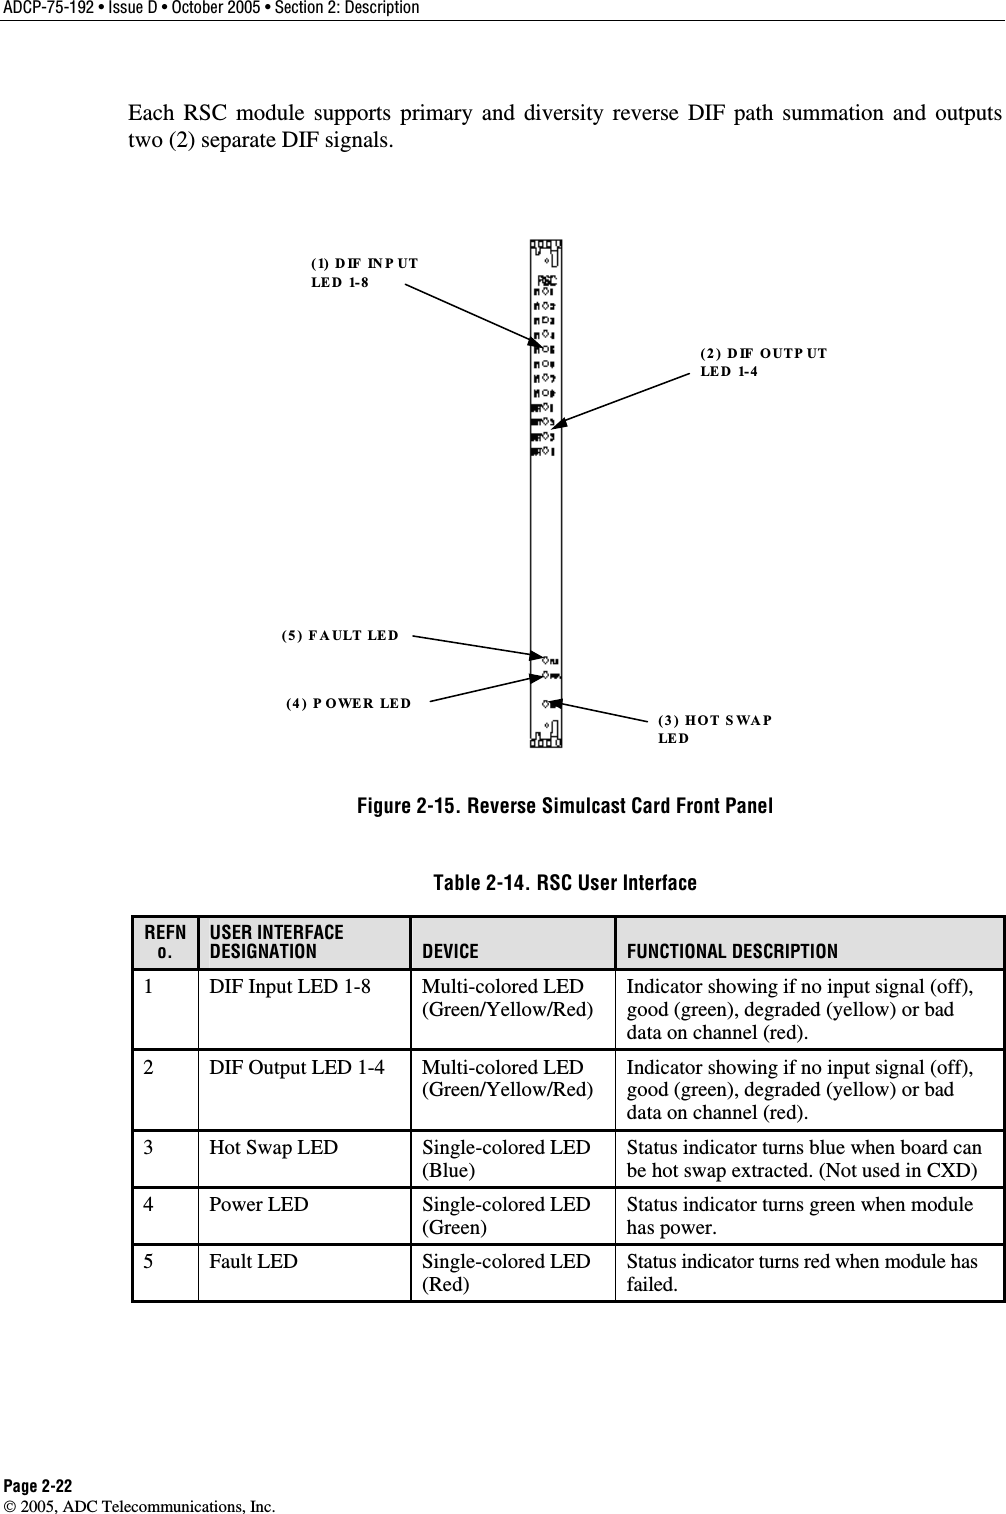 ADCP-75-192 • Issue D • October 2005 • Section 2: Description Page 2-22  2005, ADC Telecommunications, Inc. Each RSC module supports primary and diversity reverse DIF path summation and outputs two (2) separate DIF signals.  (5) FAULT LED(3) HOT SWAP  LE D(4) P OWER LED(1) DIF INP UT LED  1-8(2) DIF OUTP UT LE D  1- 4 Figure 2-15. Reverse Simulcast Card Front Panel Table 2-14. RSC User Interface REFNo. USER INTERFACE DESIGNATION  DEVICE  FUNCTIONAL DESCRIPTION 1  DIF Input LED 1-8  Multi-colored LED (Green/Yellow/Red)  Indicator showing if no input signal (off), good (green), degraded (yellow) or bad data on channel (red). 2  DIF Output LED 1-4  Multi-colored LED (Green/Yellow/Red)  Indicator showing if no input signal (off), good (green), degraded (yellow) or bad data on channel (red). 3  Hot Swap LED  Single-colored LED (Blue)  Status indicator turns blue when board can be hot swap extracted. (Not used in CXD) 4 Power LED  Single-colored LED (Green)  Status indicator turns green when module has power. 5 Fault LED  Single-colored LED (Red) Status indicator turns red when module has failed.   